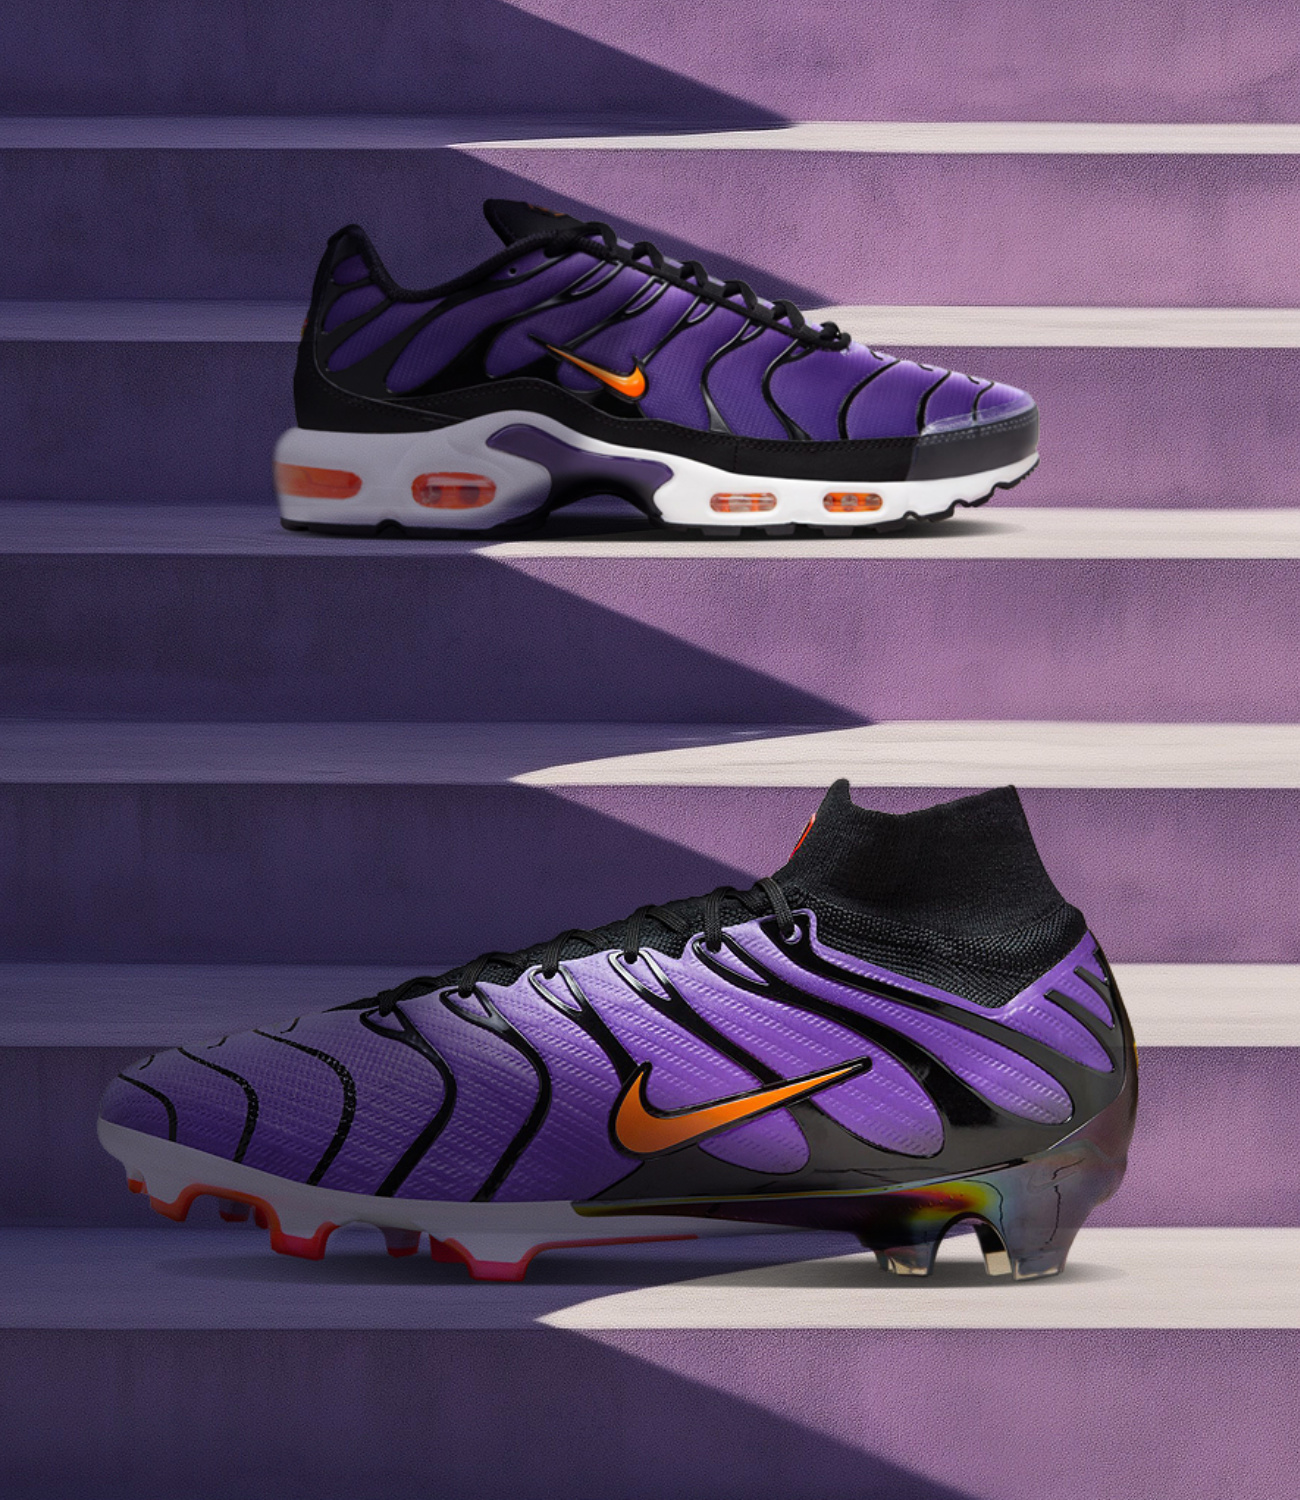 The Nike Mercurial x Air Max collection will be worn by Kylian Mbappé.